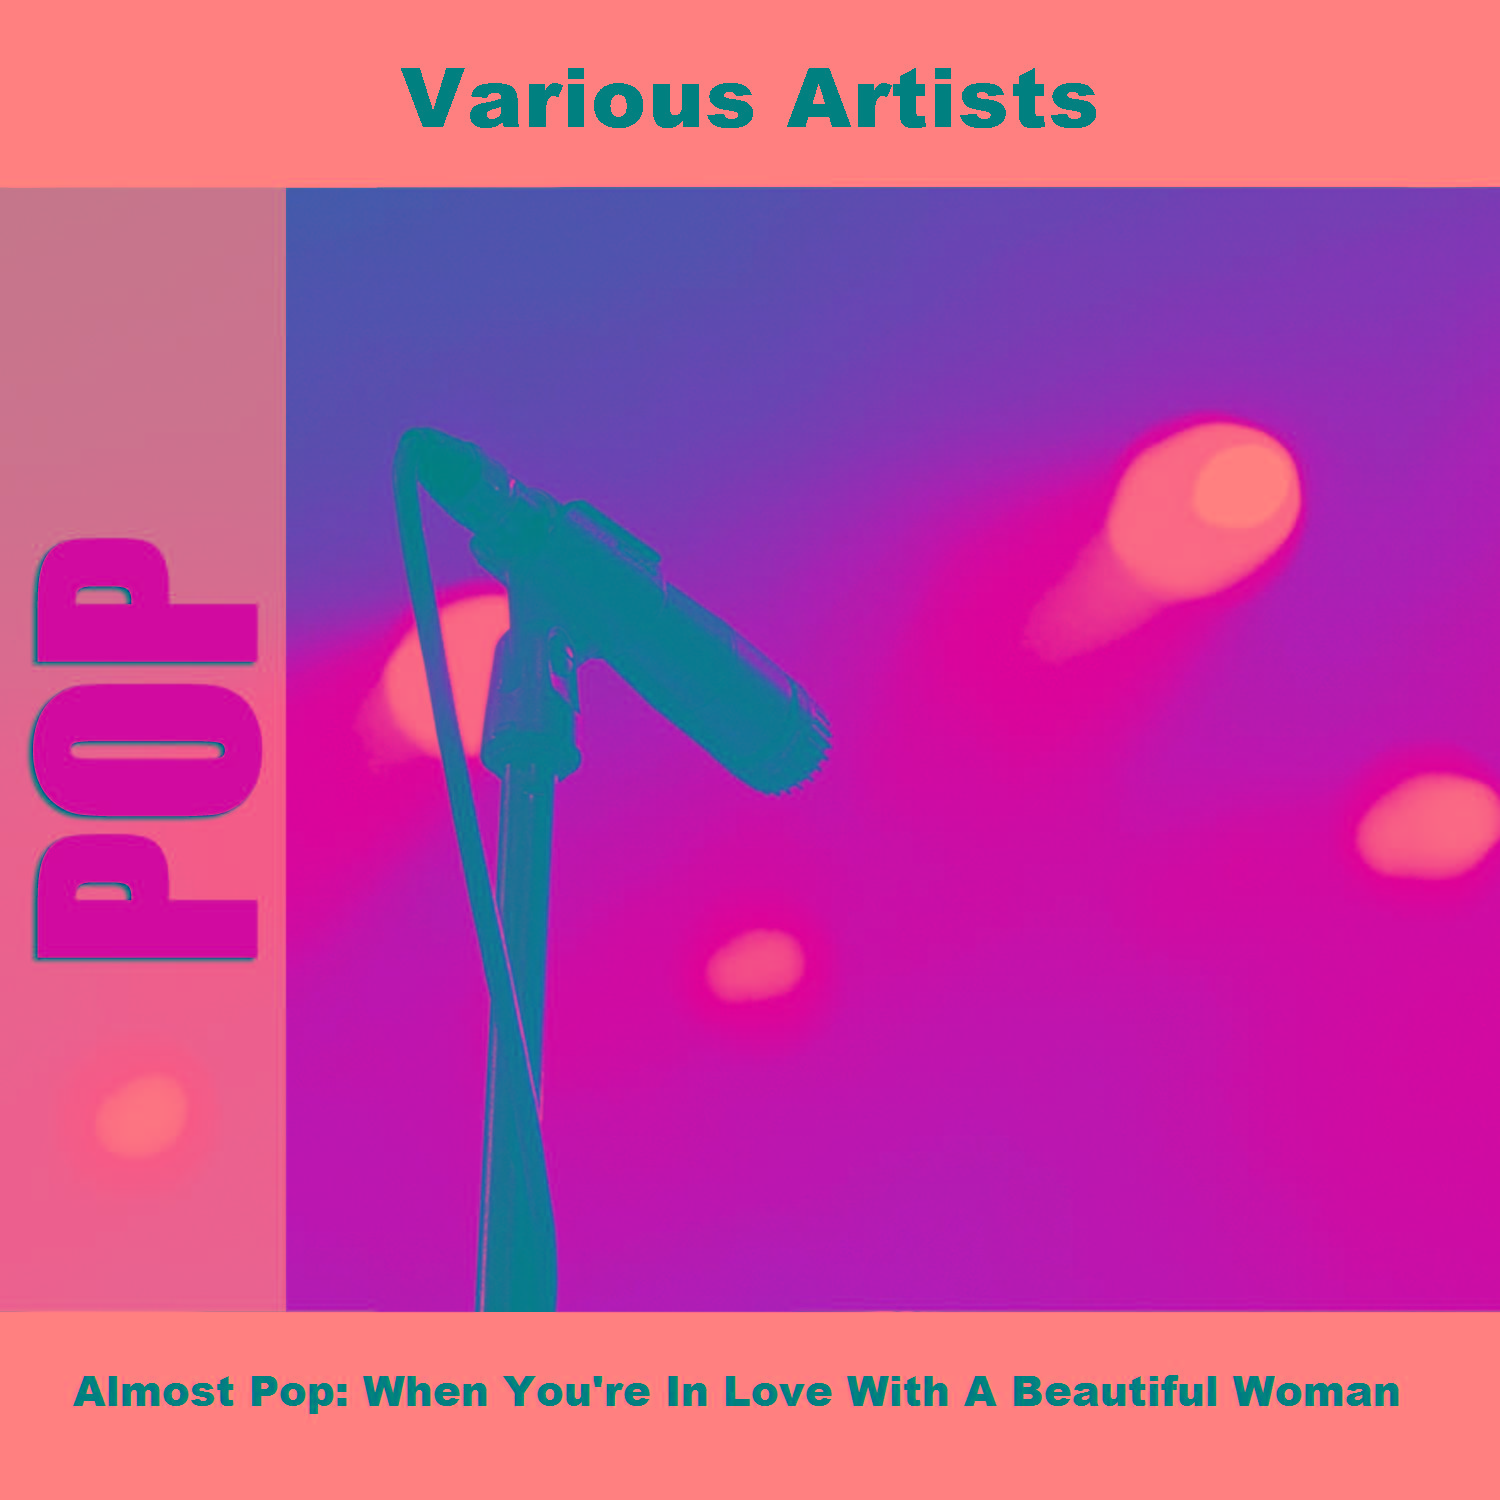 Almost Pop: When You're In Love With A Beautiful Woman